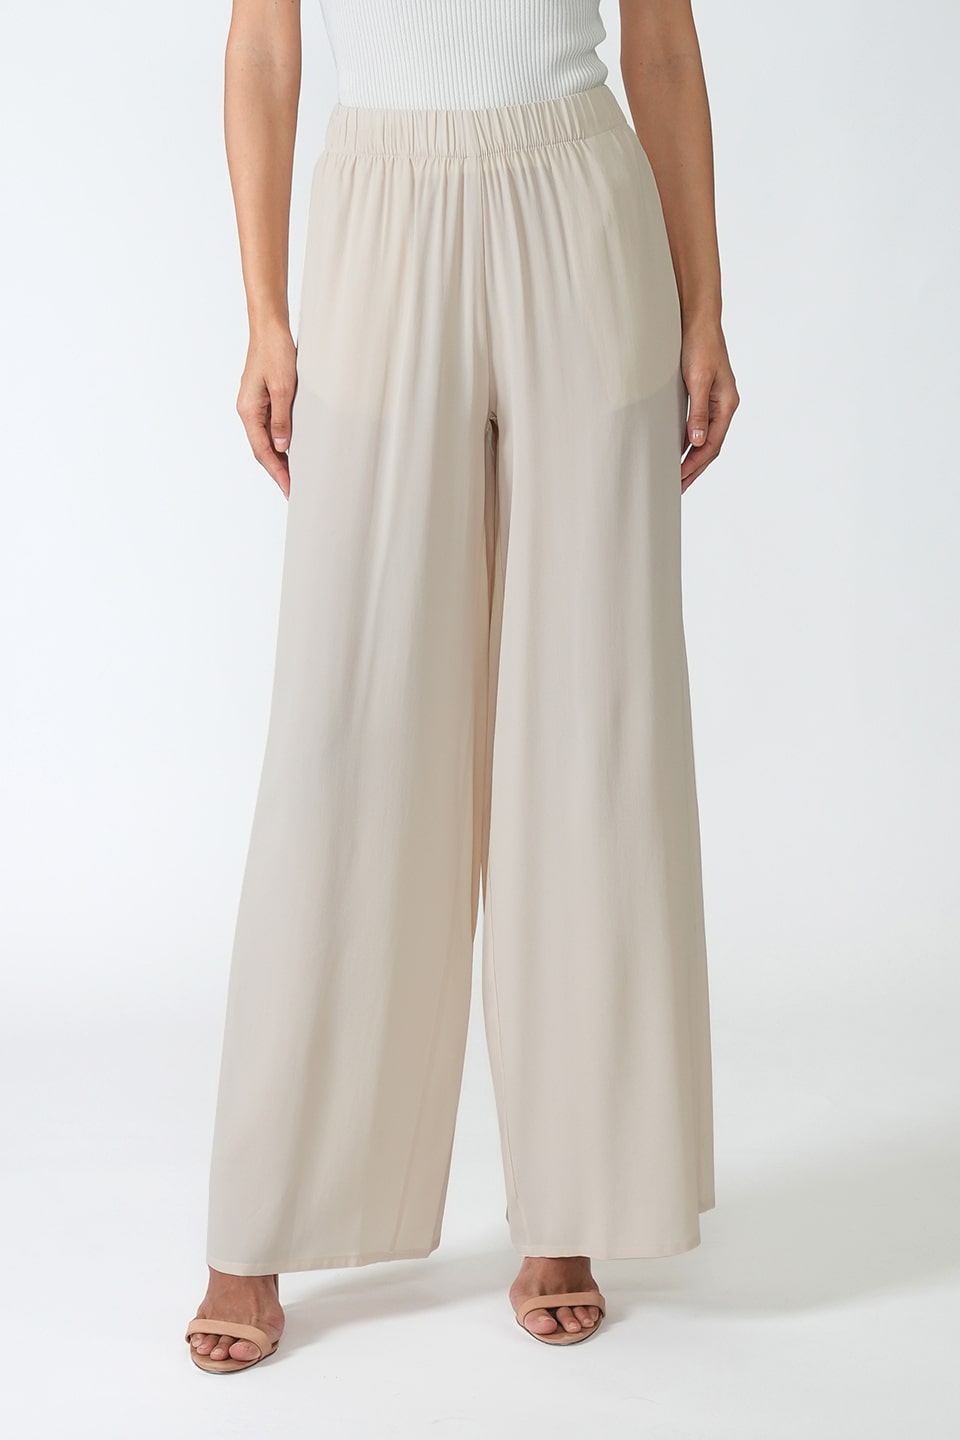 Shop online trendy Ivory Women pants from Federica Tosi Fashion designer. Product gallery 1